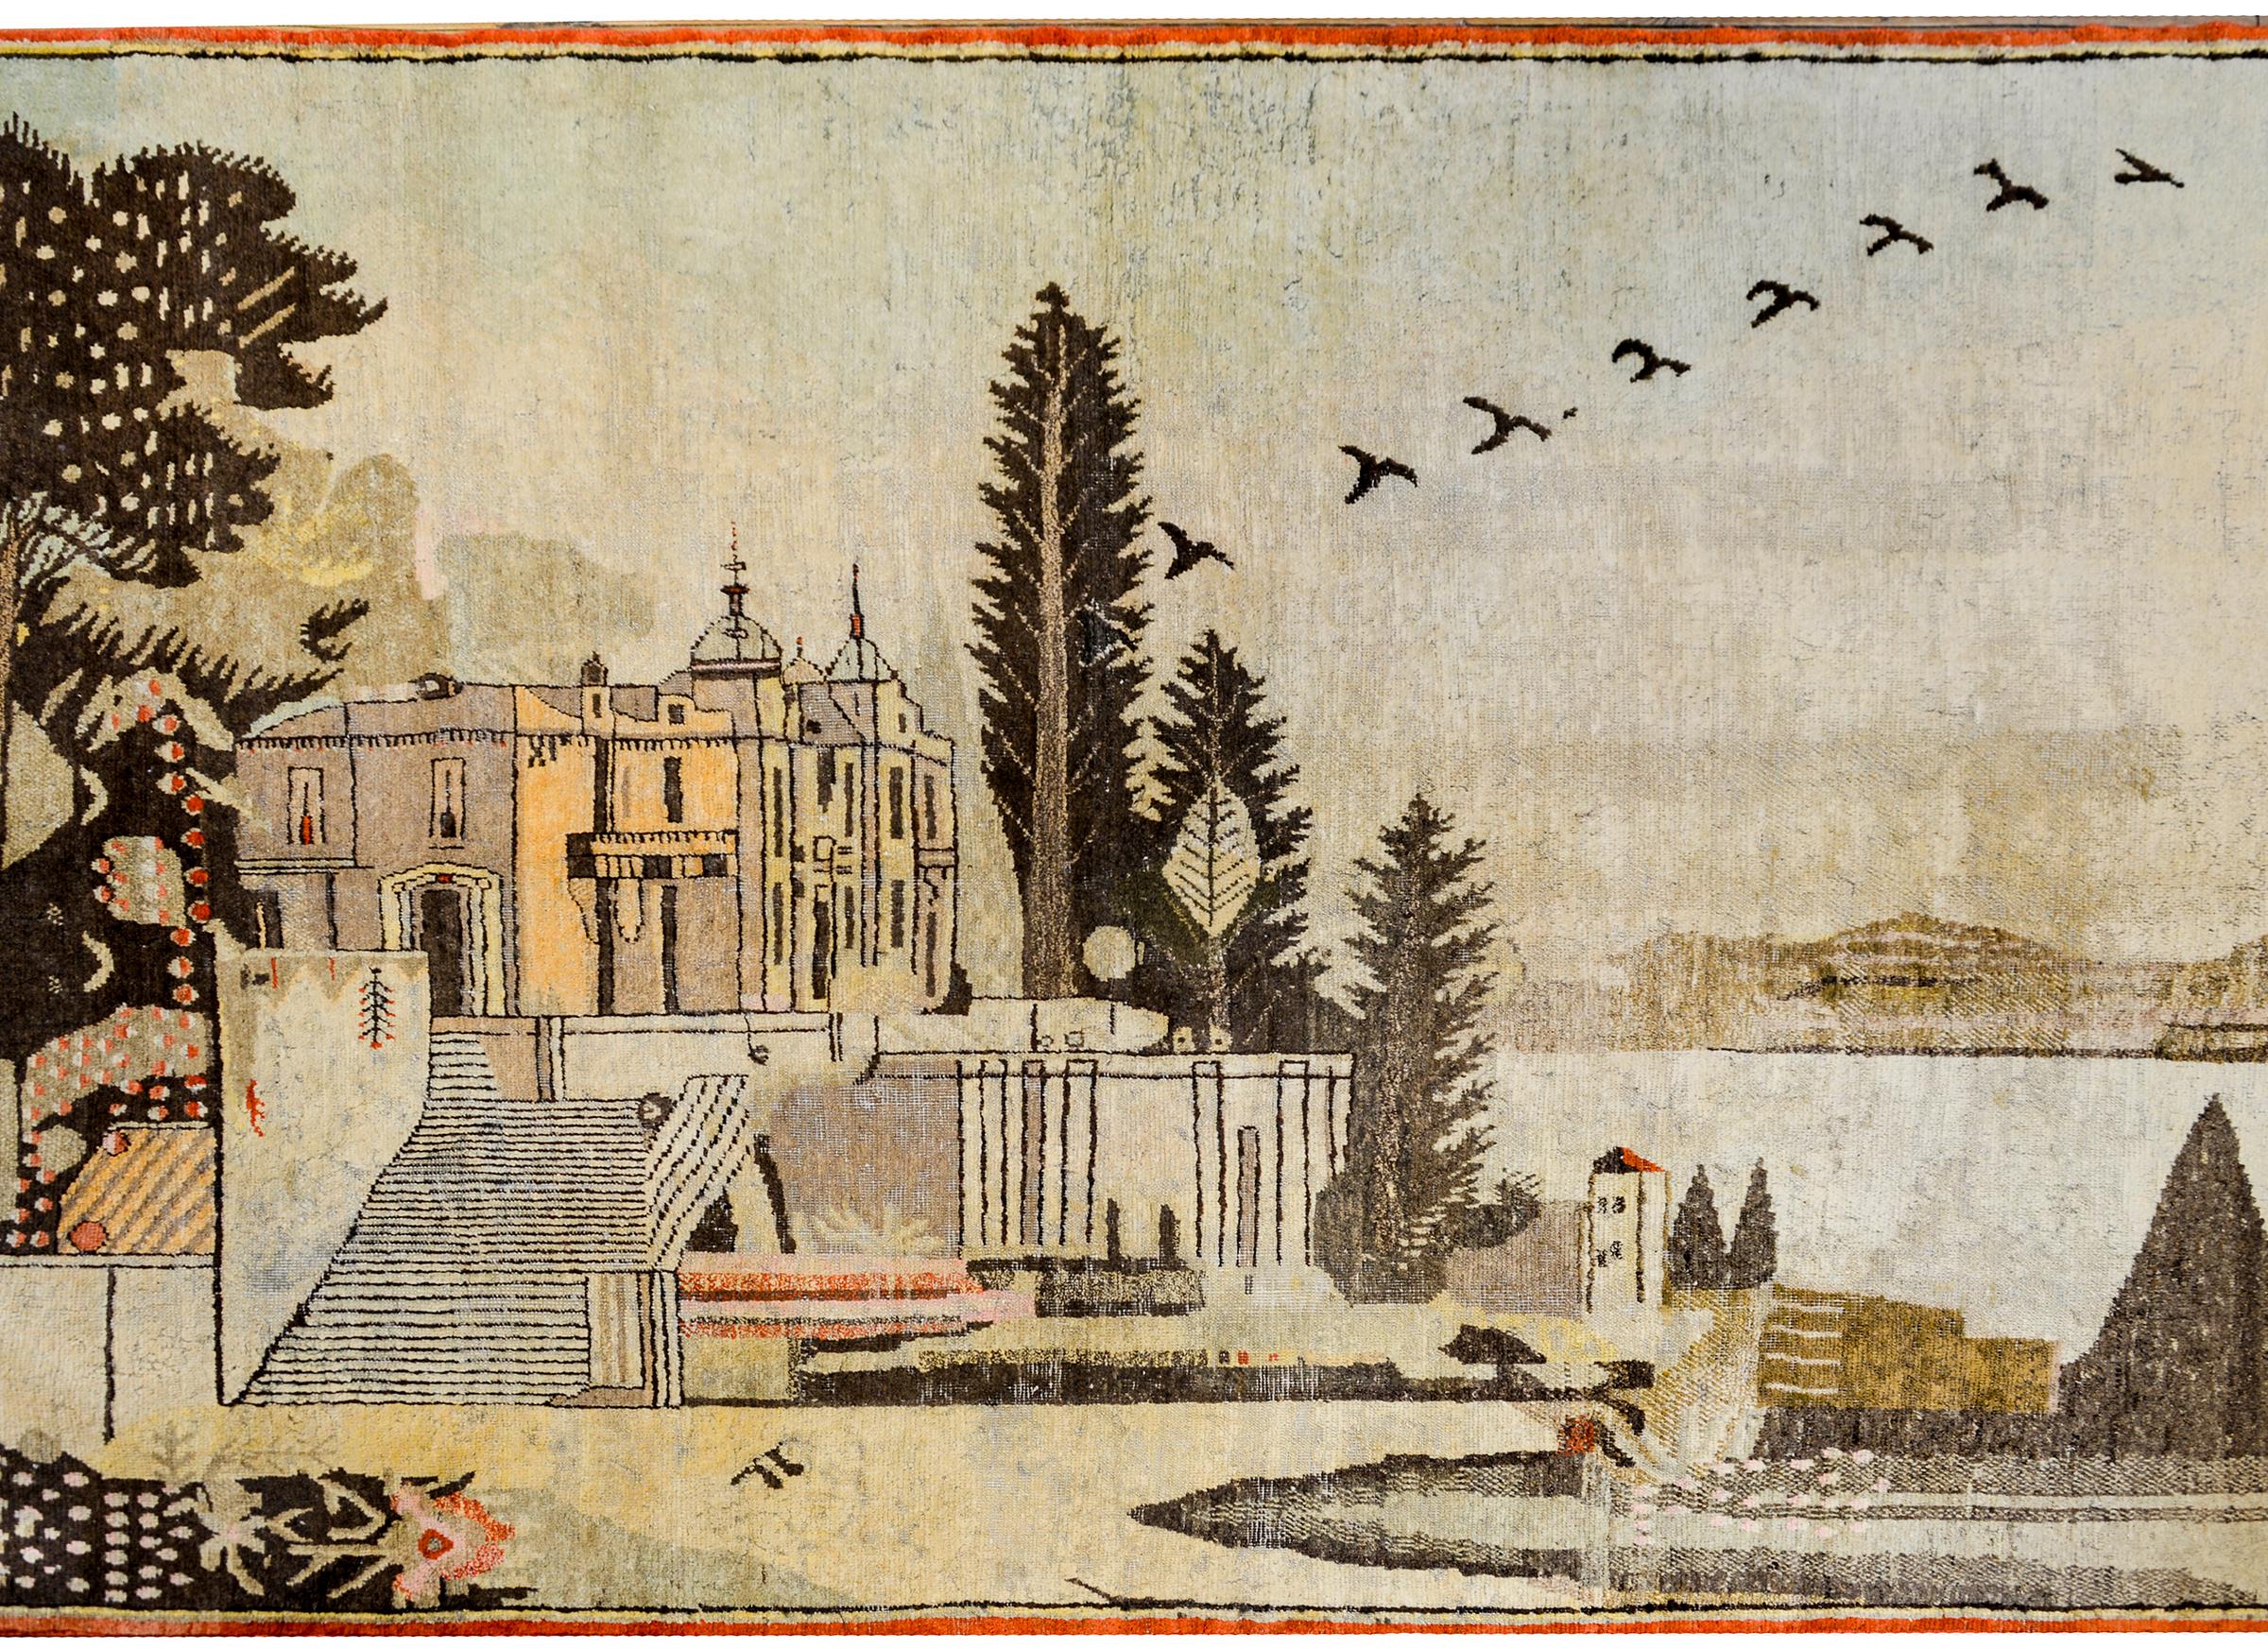 A fantastic early 20th century Central Asian pictorial Yargkand rug depicting a building sitting on a hill overlooking a lake. A grande staircase leads to a garden with trees and flowers, while a flock of birds flies past.